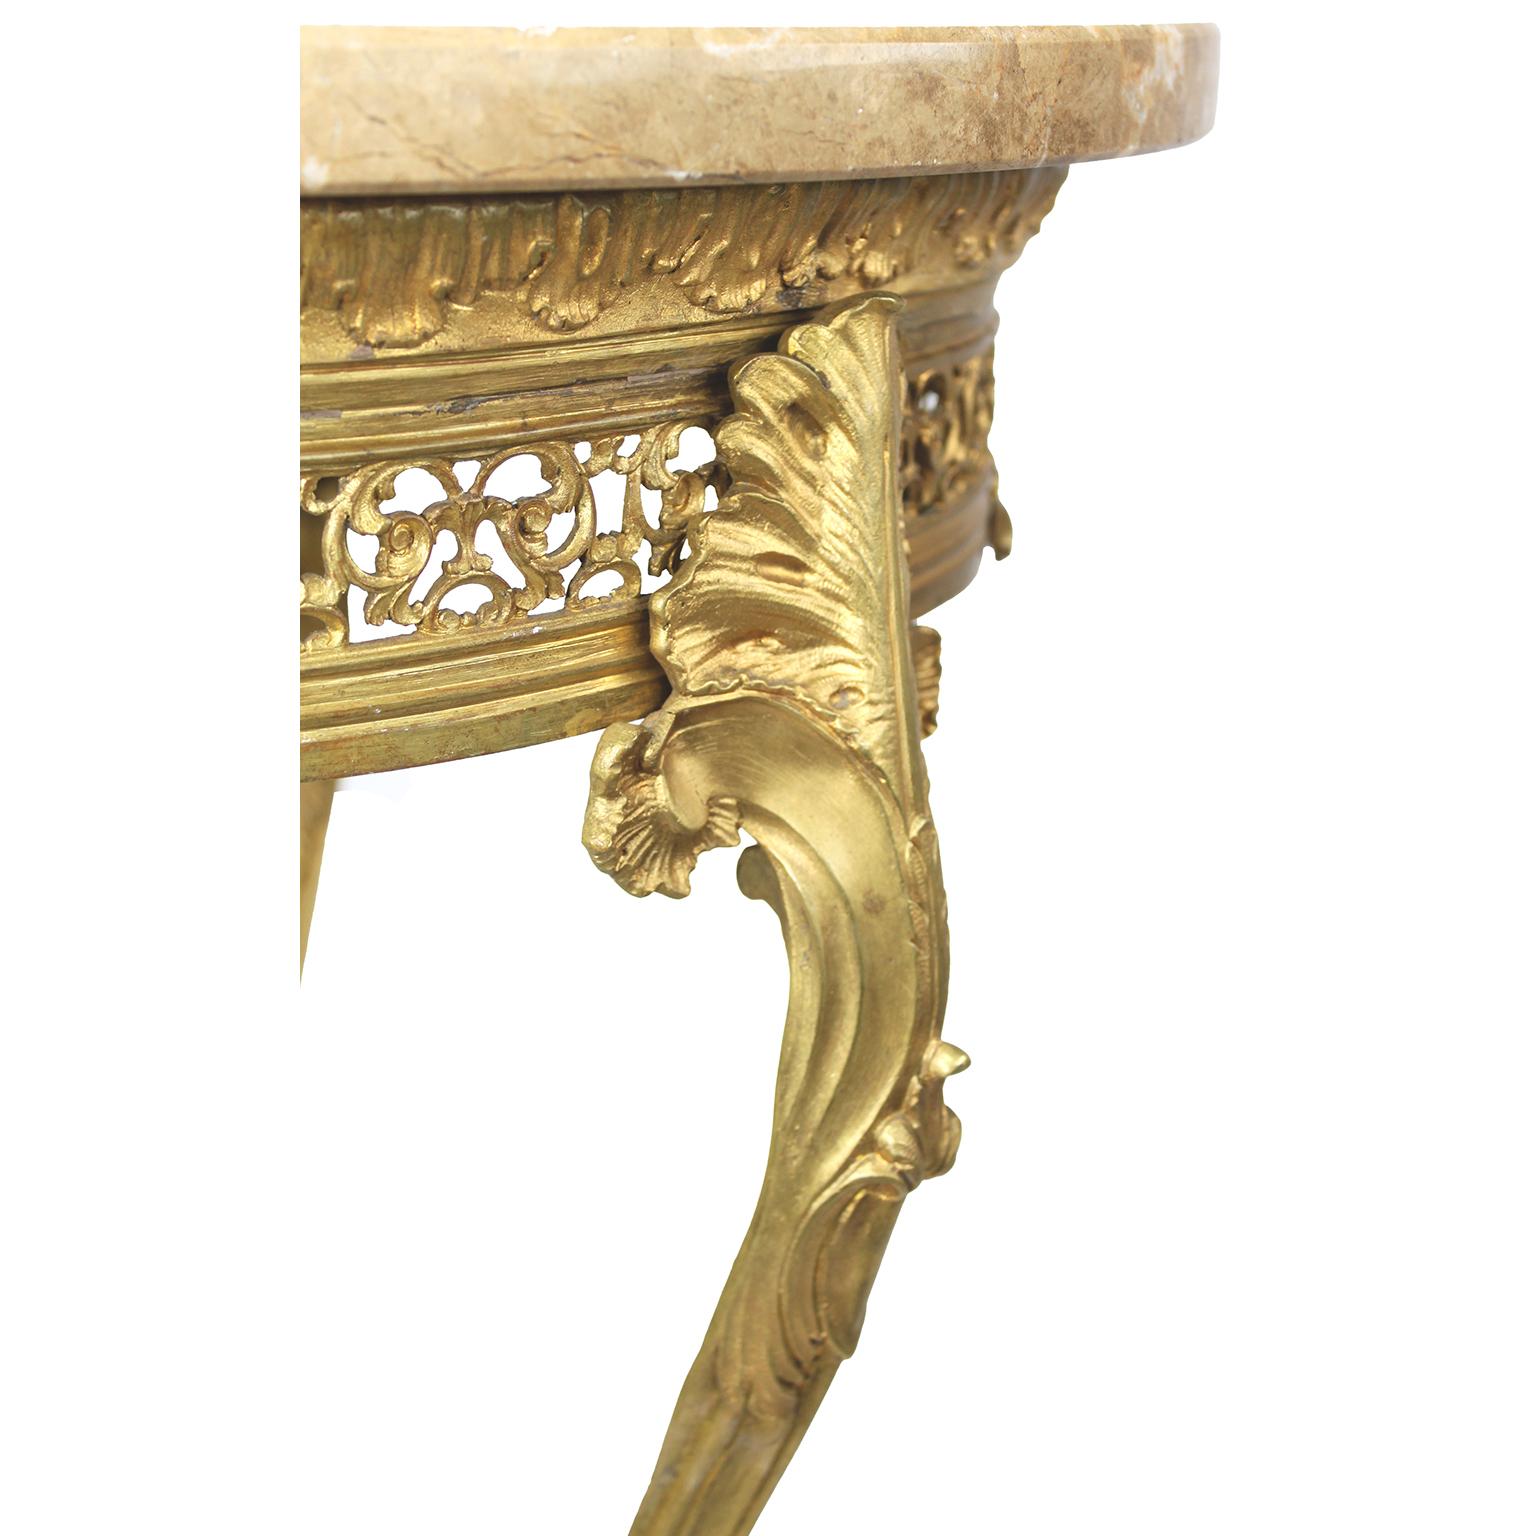 A French Belle Époque Louis XV Style Gilt-Bronze Gueridon Table with Marble Top For Sale 2